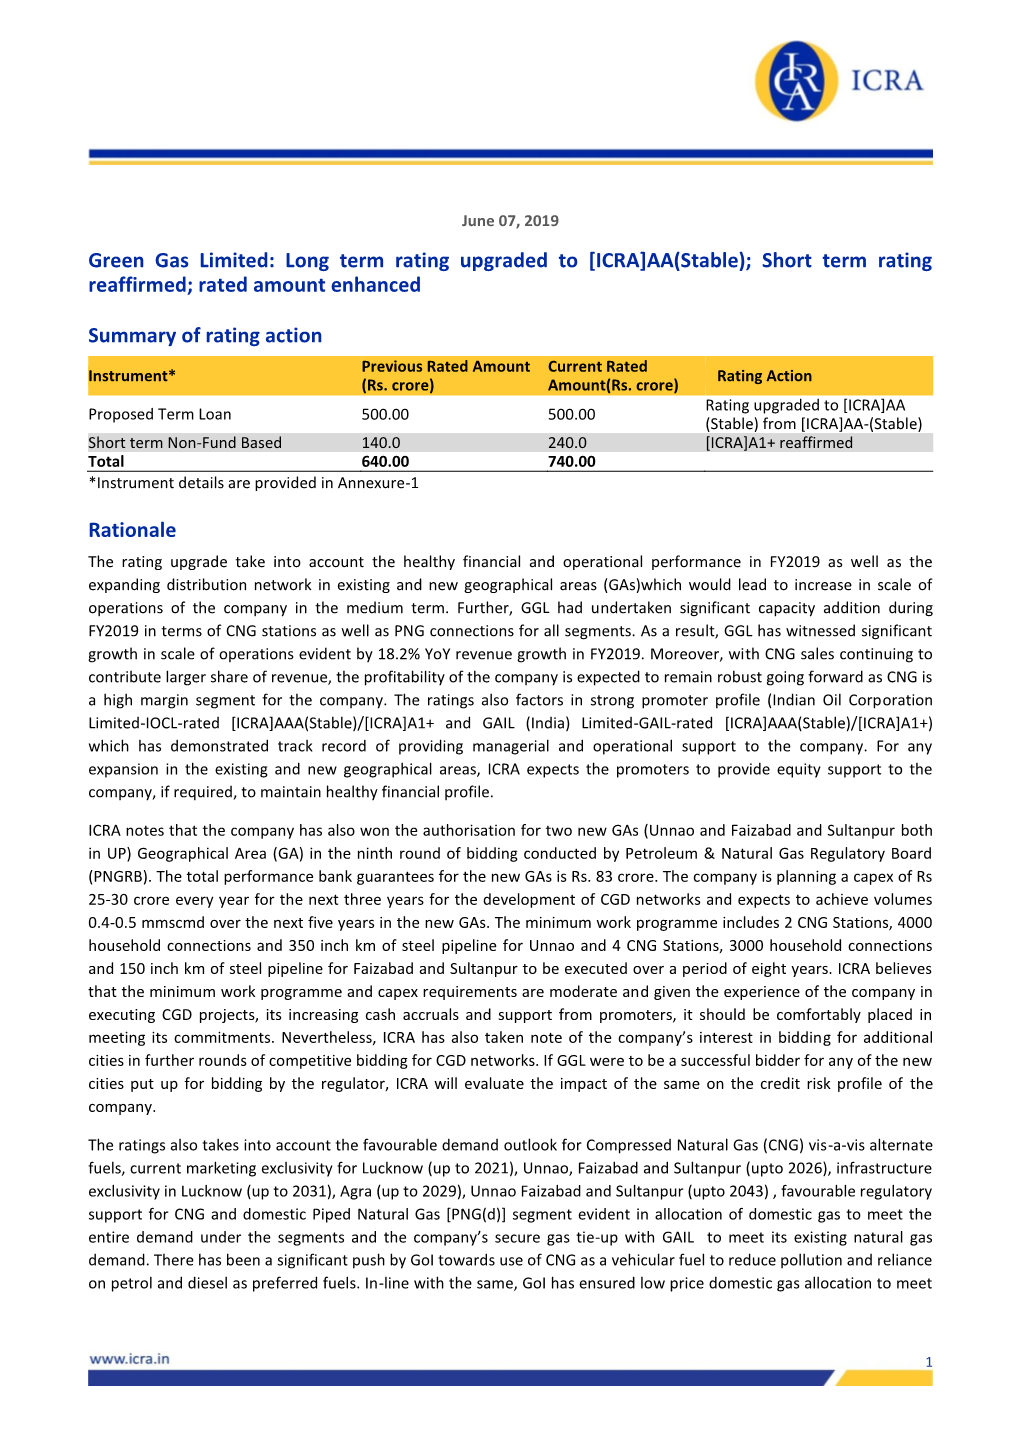 Green Gas Limited: Long Term Rating Upgraded to [ICRA]AA(Stable); Short Term Rating Reaffirmed; Rated Amount Enhanced